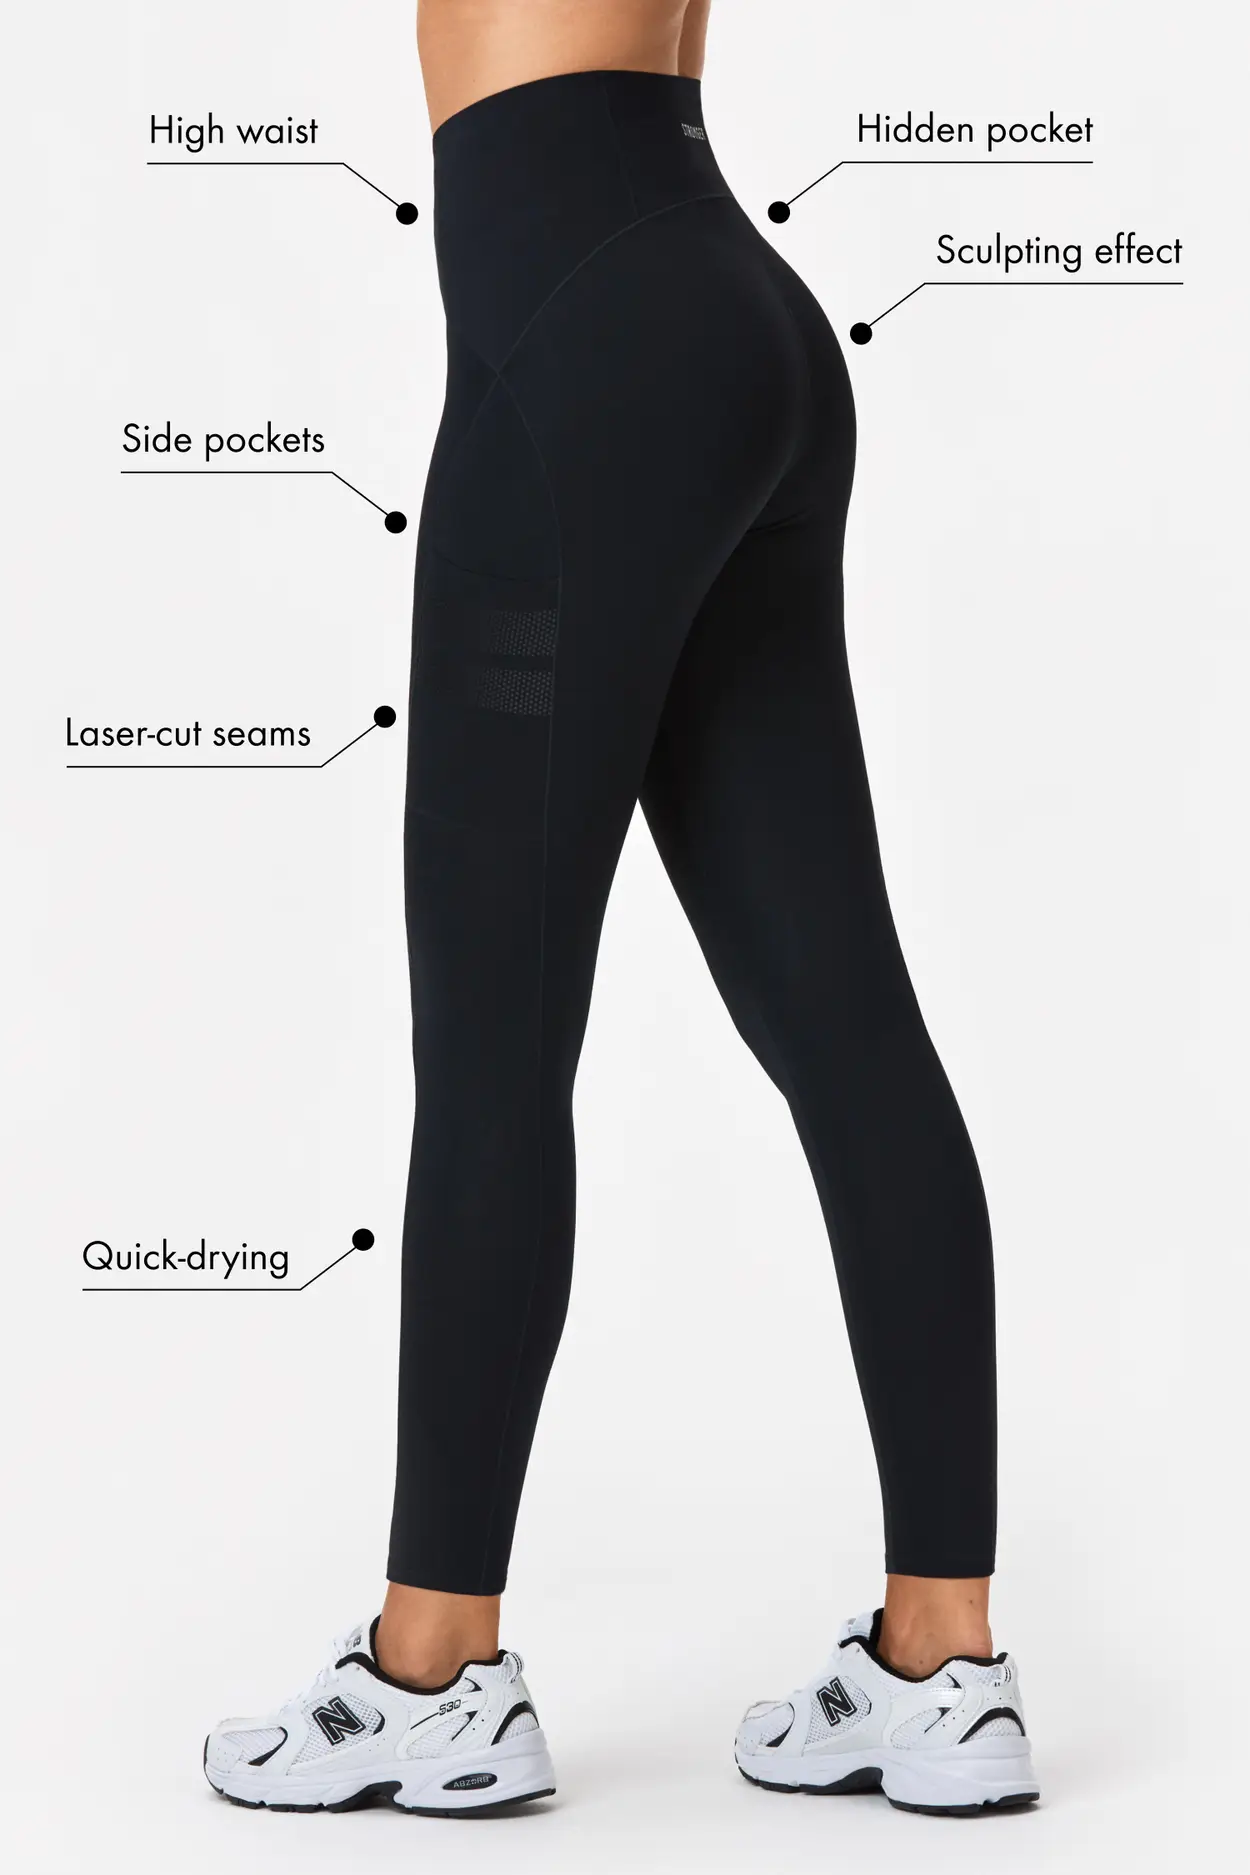 Shaping black sports leggings with pockets